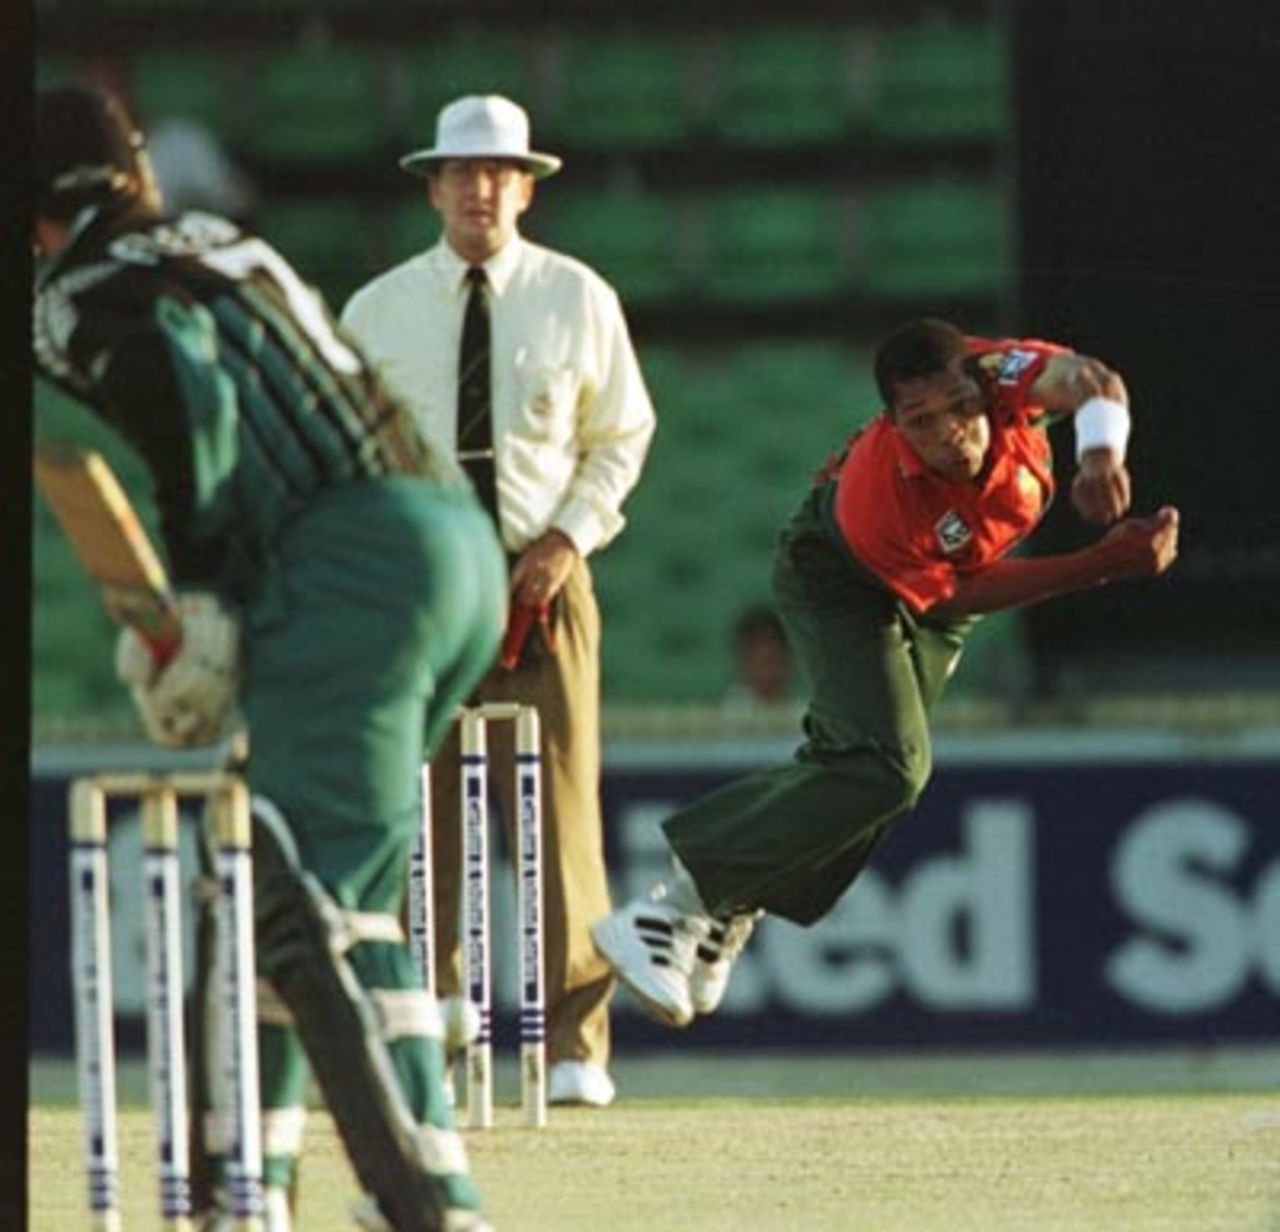 Makhaya Ntini airborne as he throws himself into his bowling during his first over of his first ODI for South Africa.....South Africa v New Zealand ODI at the WACA, Perth, Friday January 16th 1998.